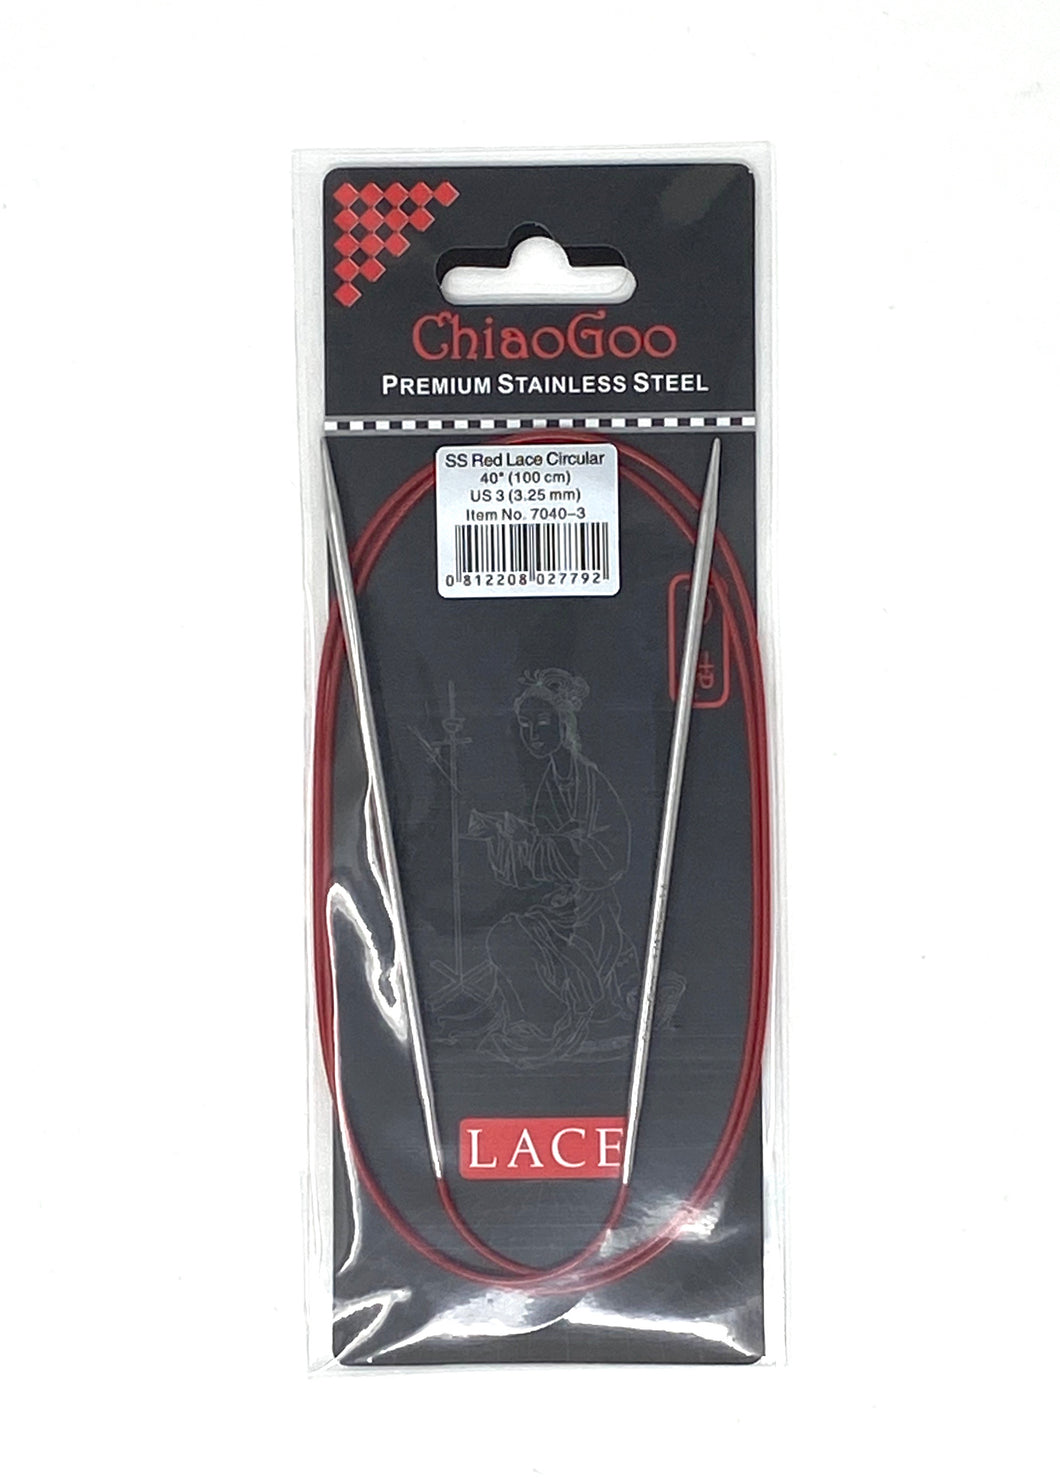 ChiaoGoo Red Lace Circular Needles - US 3 - 40 Inches